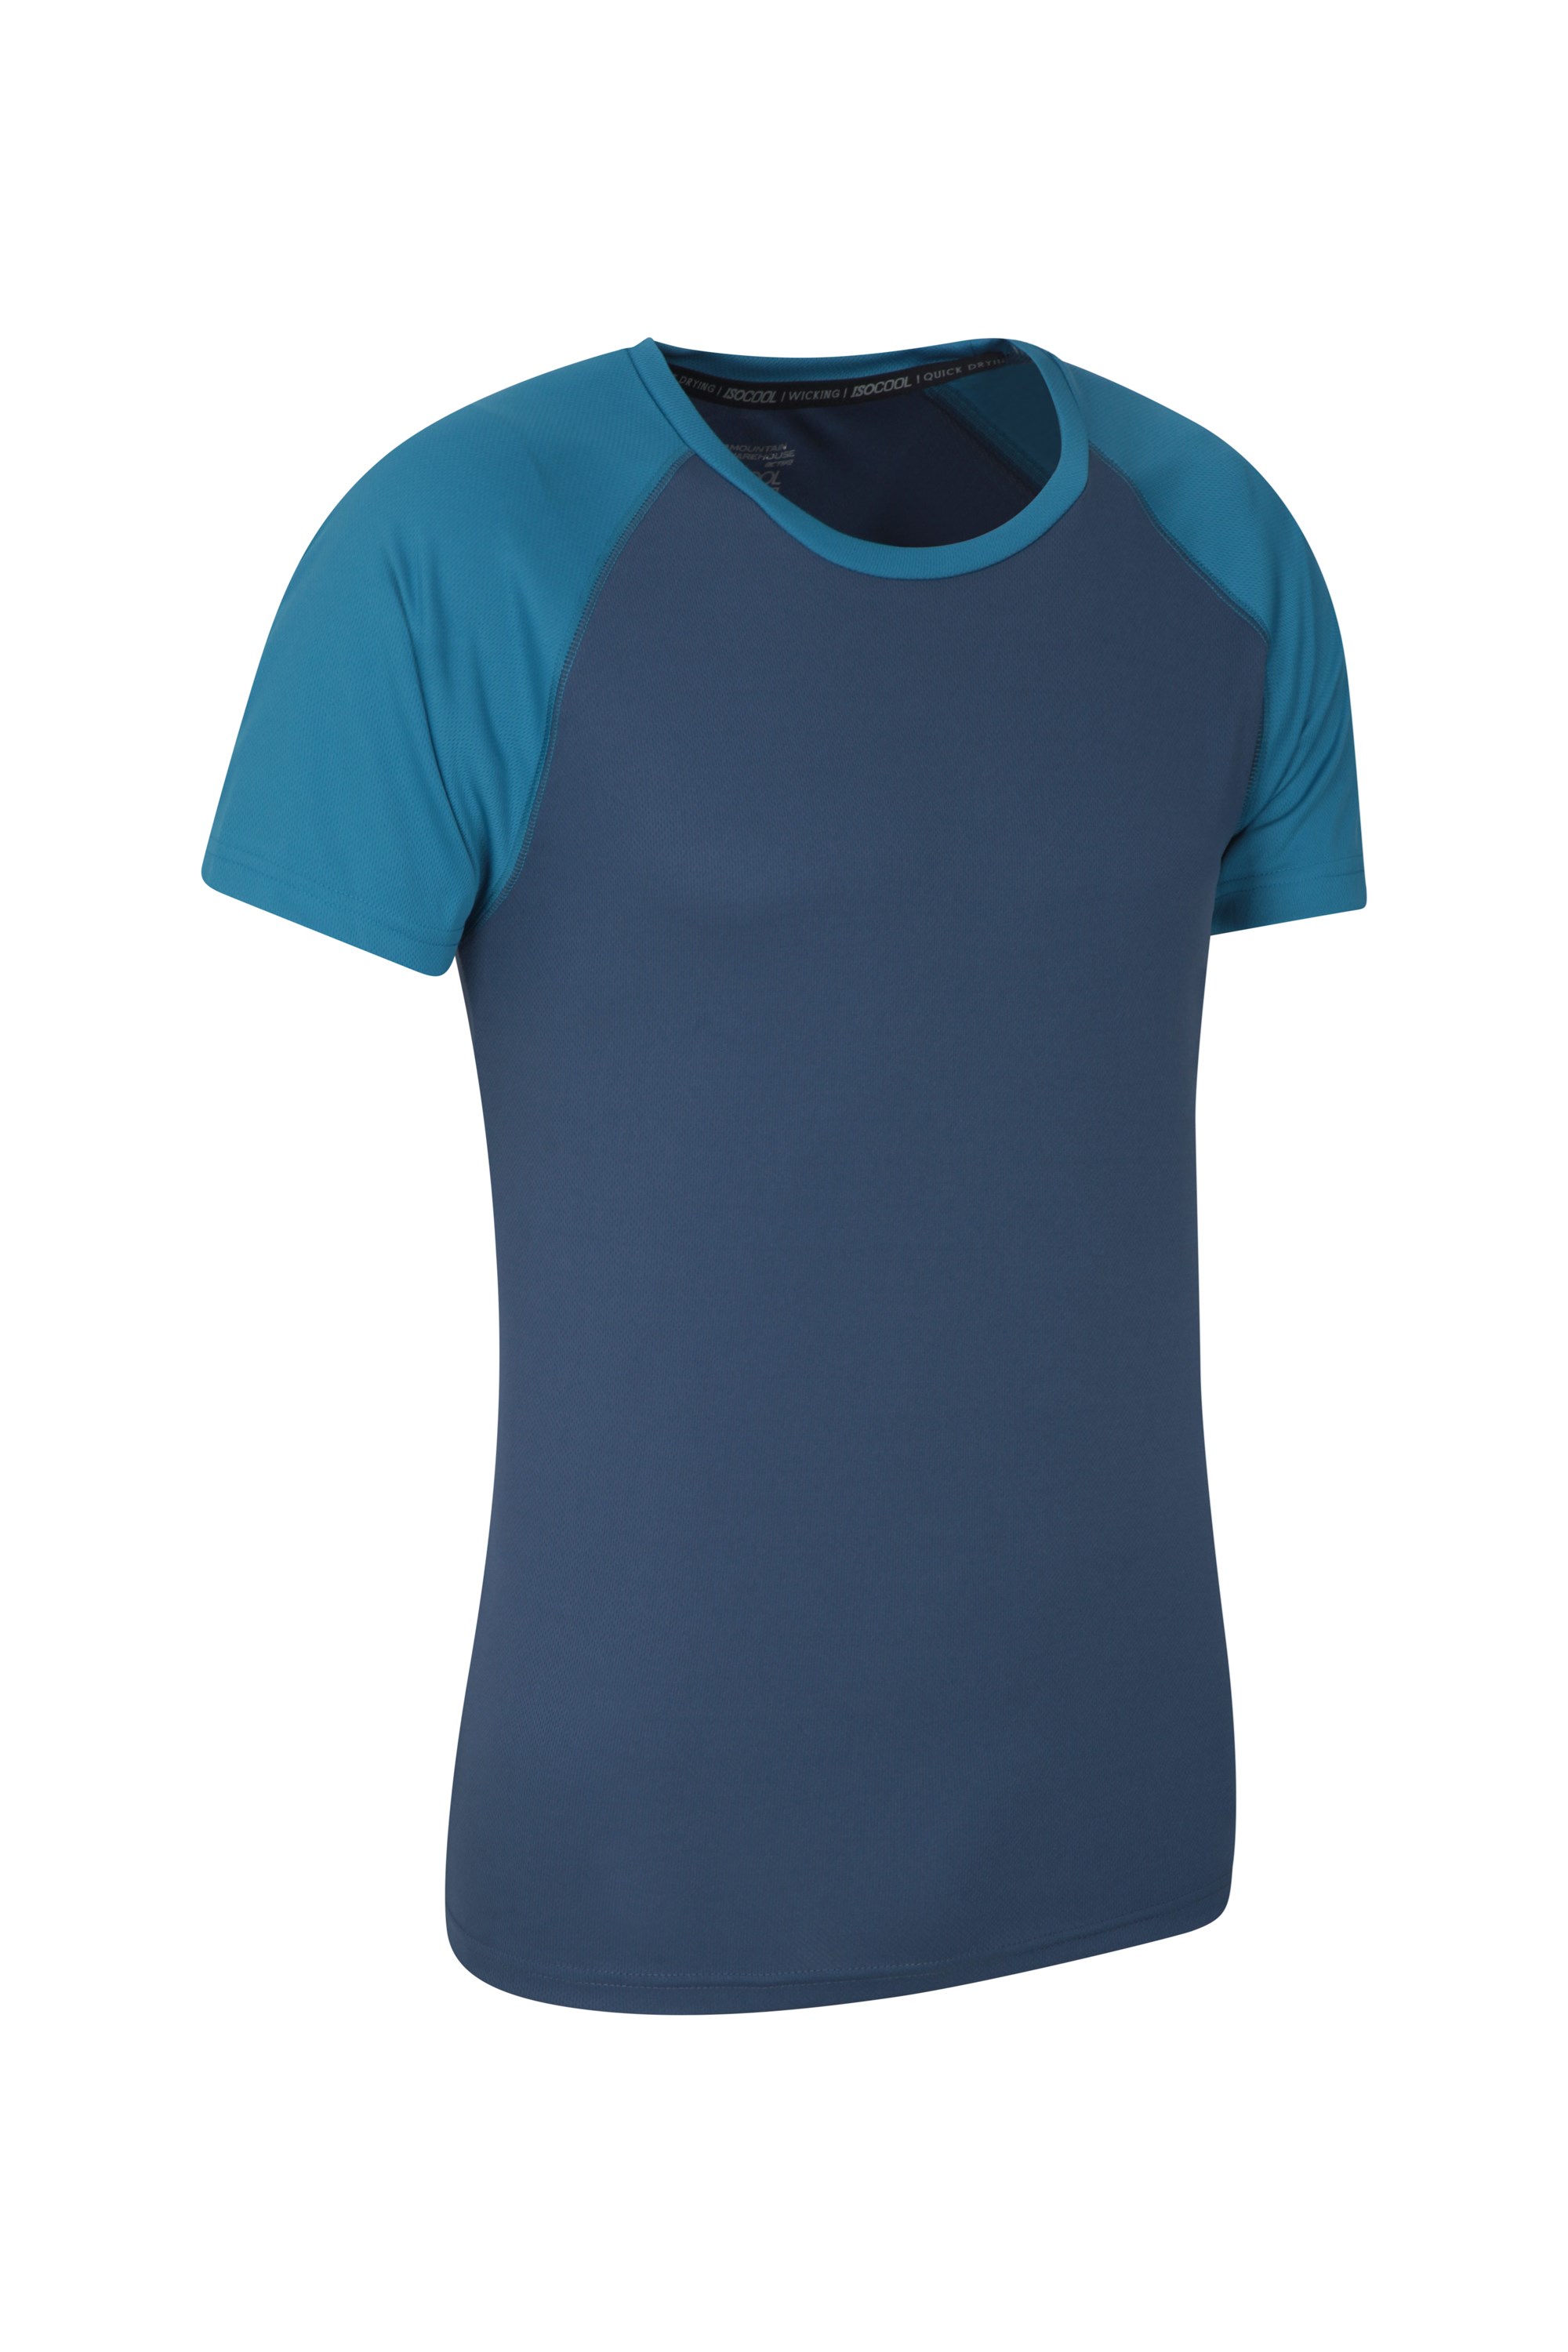 Comfortable & Quick Drying Top Lightweight Shirt Travelling for Gym Mountain Warehouse Endurance Mens T-Shirt – Breathable Summer Tee UPF50 Protection Running